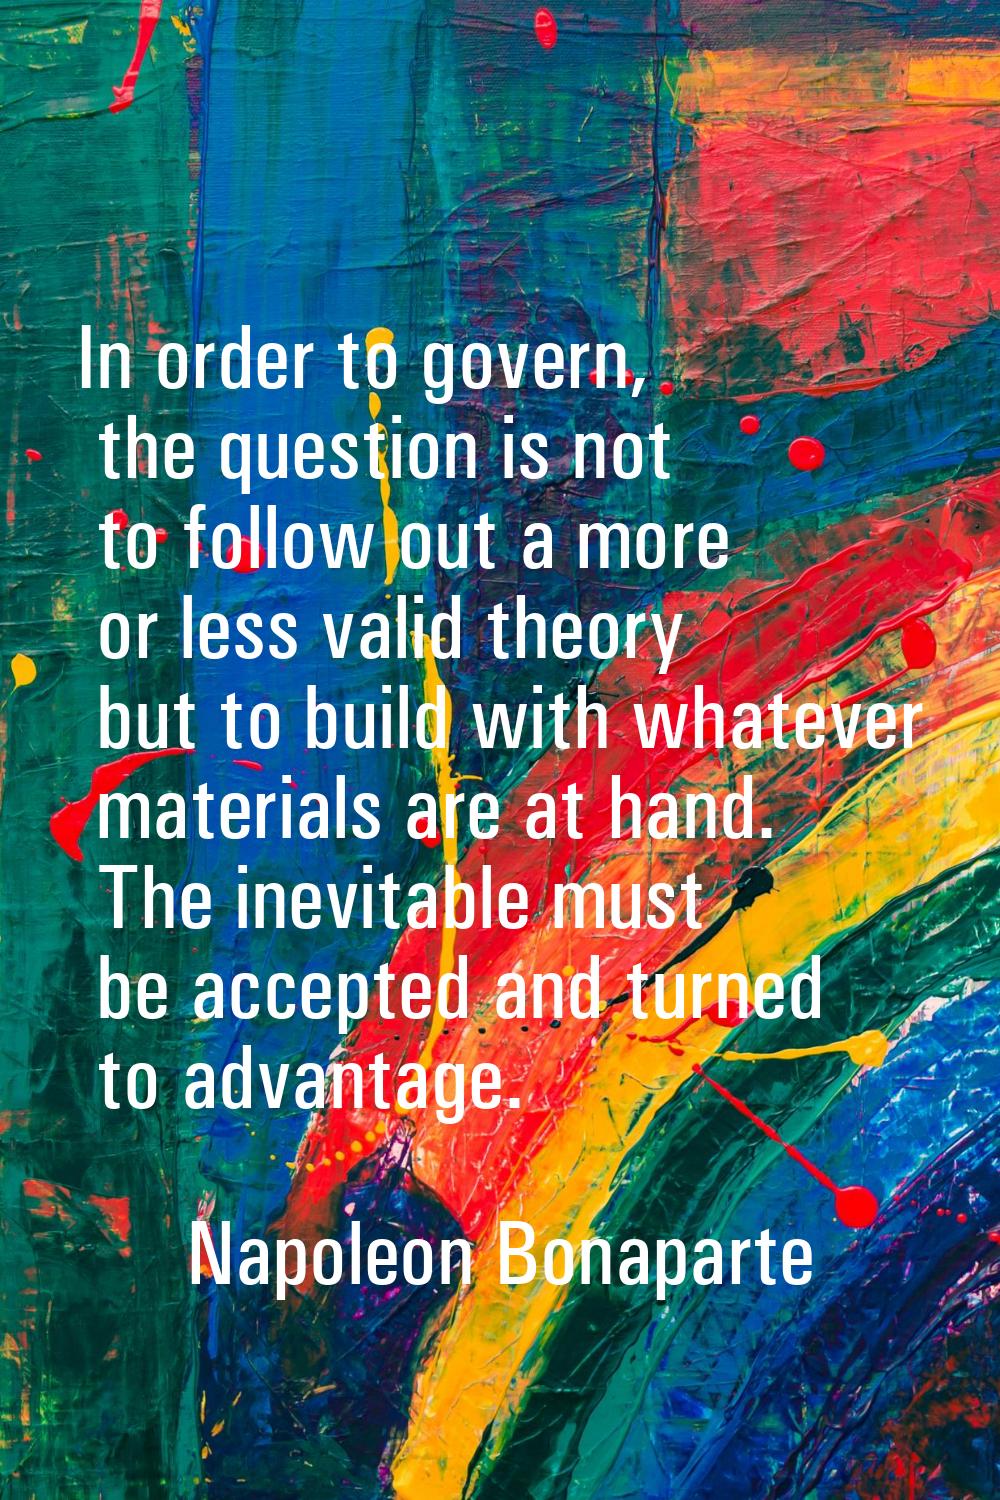 In order to govern, the question is not to follow out a more or less valid theory but to build with